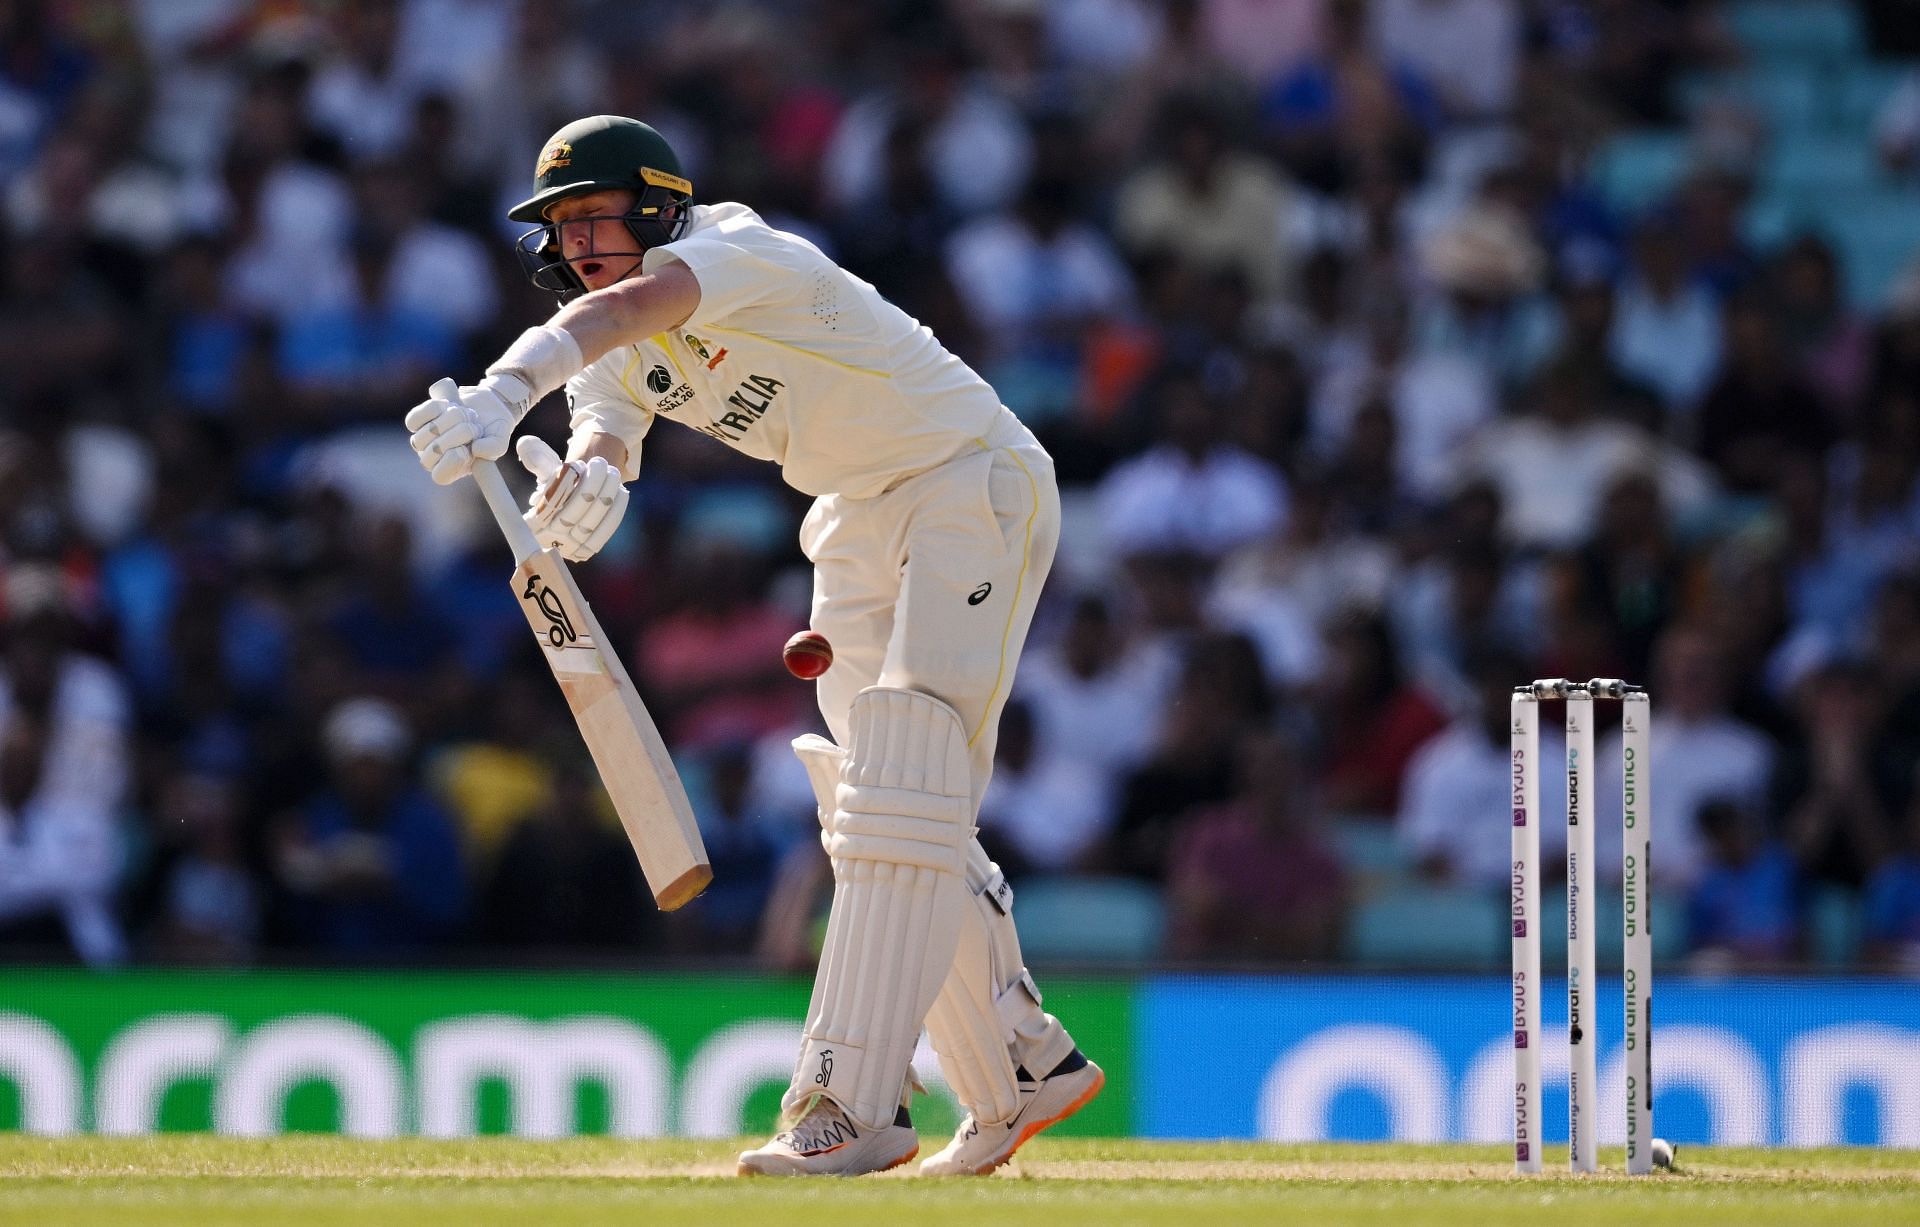 India might have to dismiss Marnus Labuschagne early to keep their chances alive.